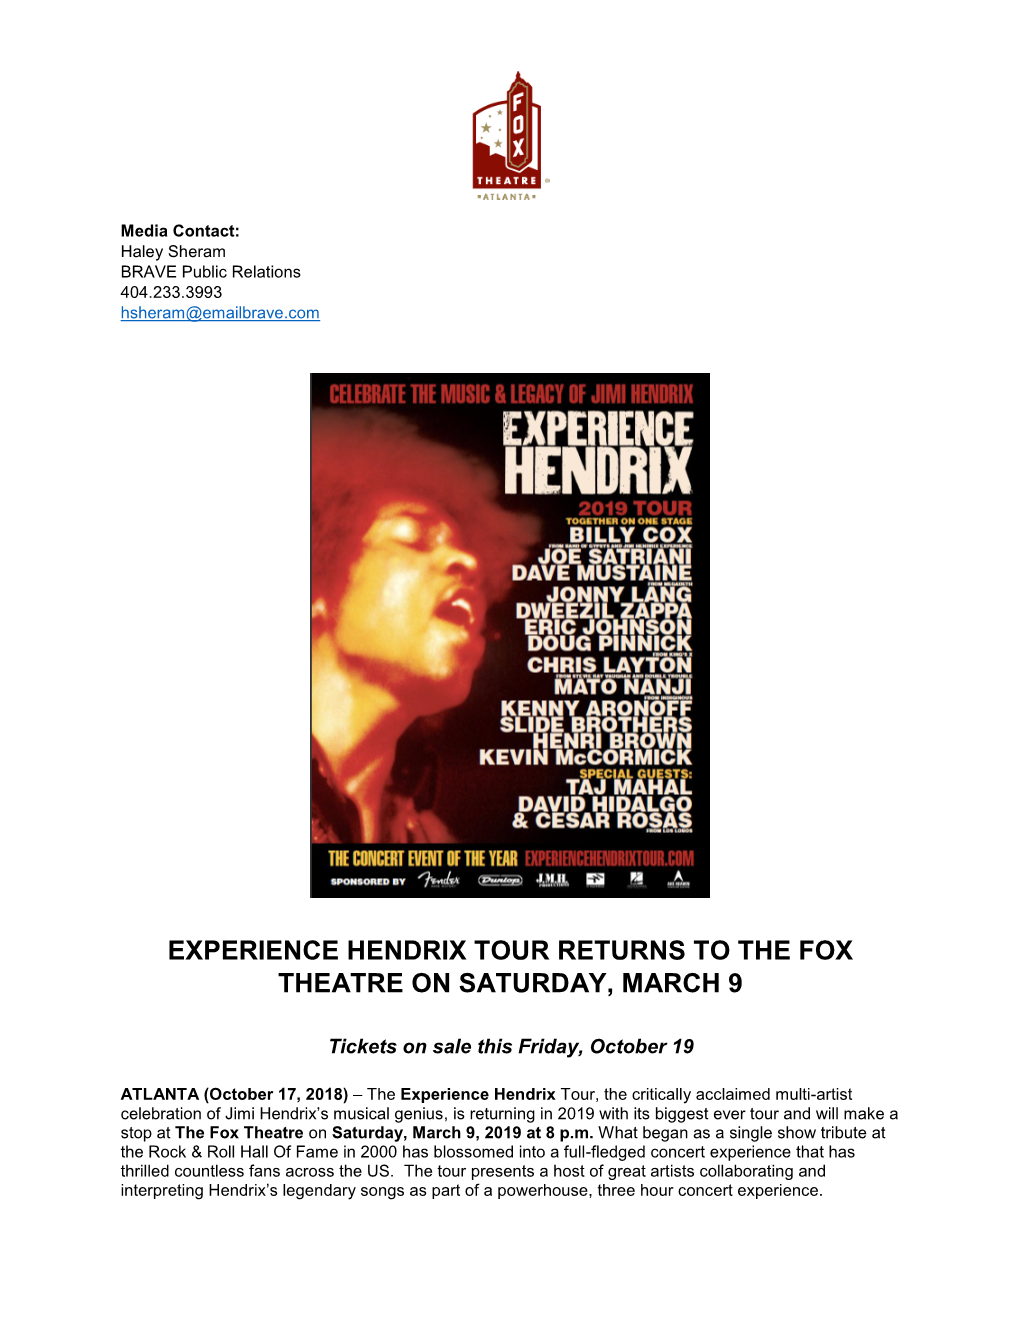 Experience Hendrix Tour Returns to the Fox Theatre on Saturday, March 9